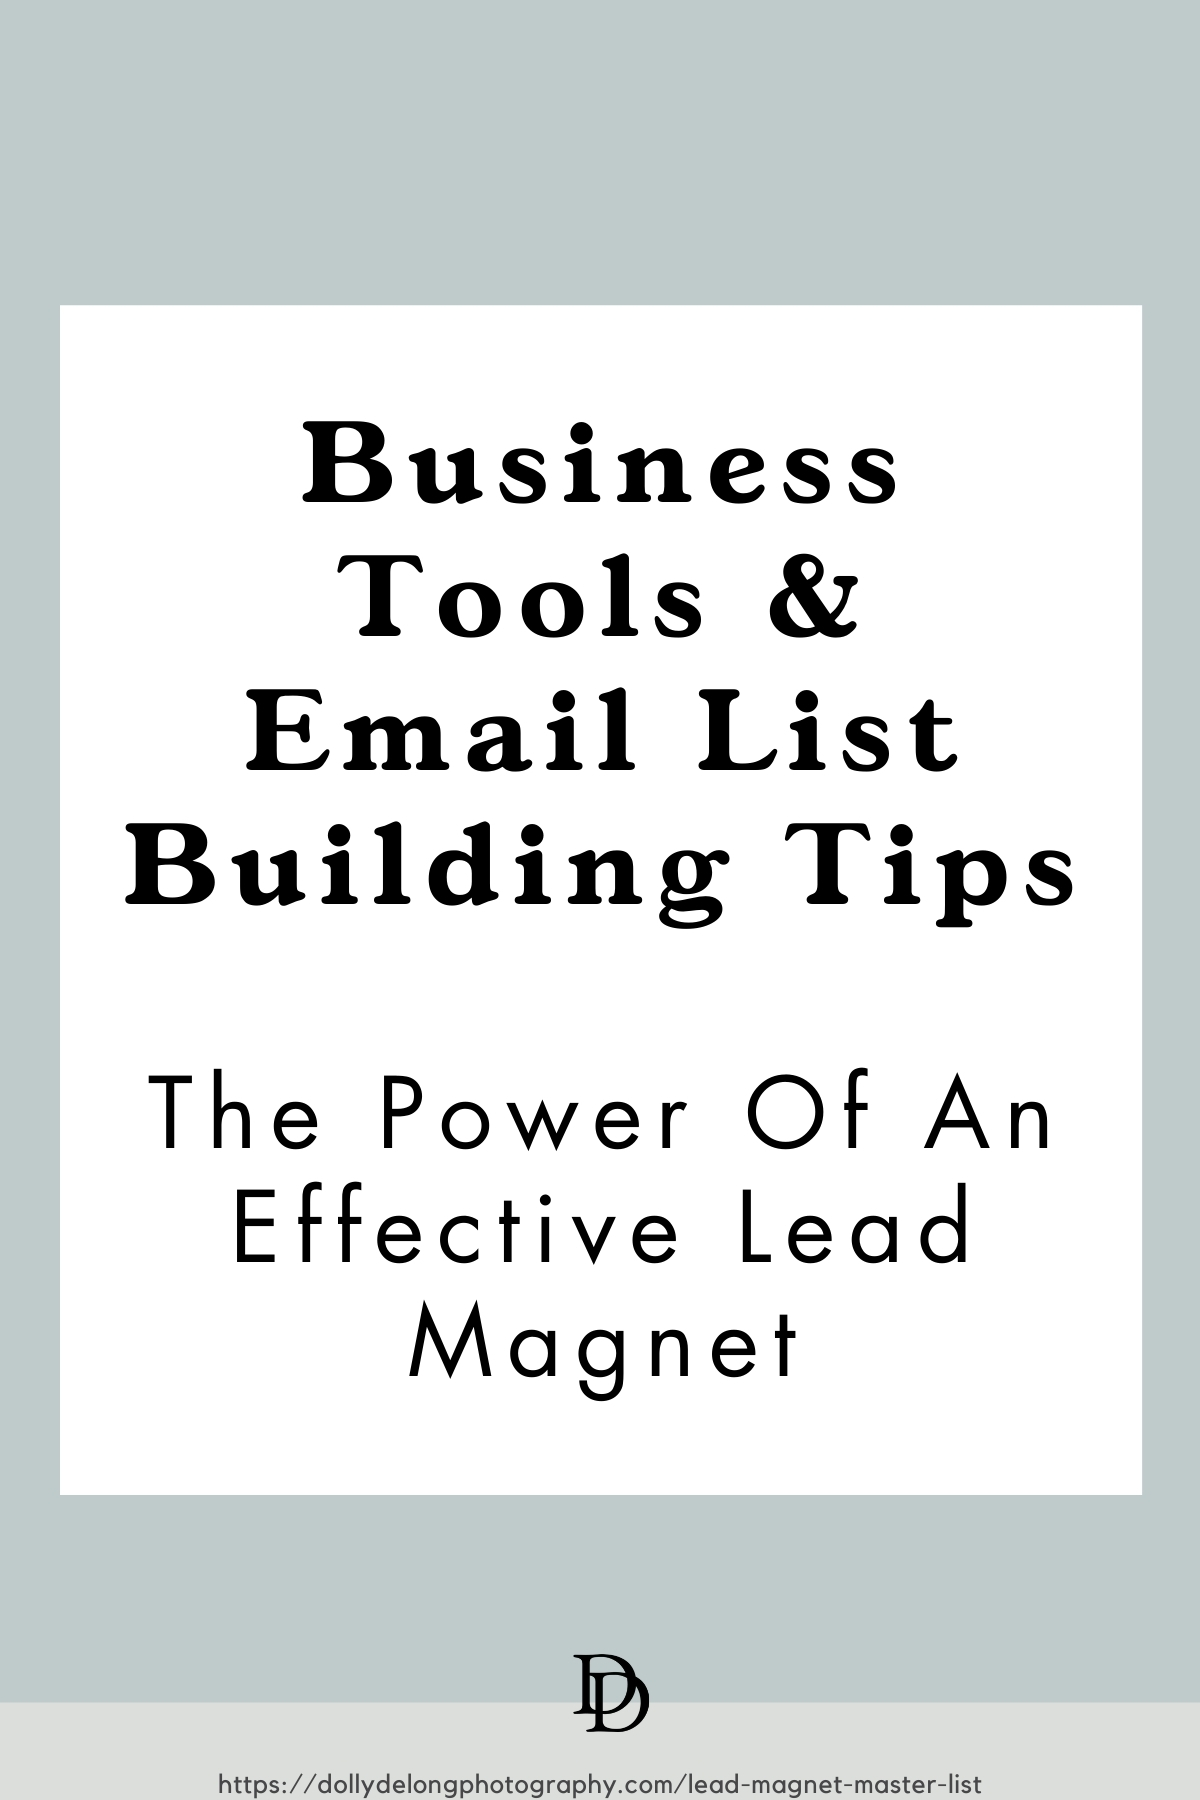 The Power Of An Effective Lead Magnet + Reasons Why You Need to Start Growing Your Email LIST NOW!